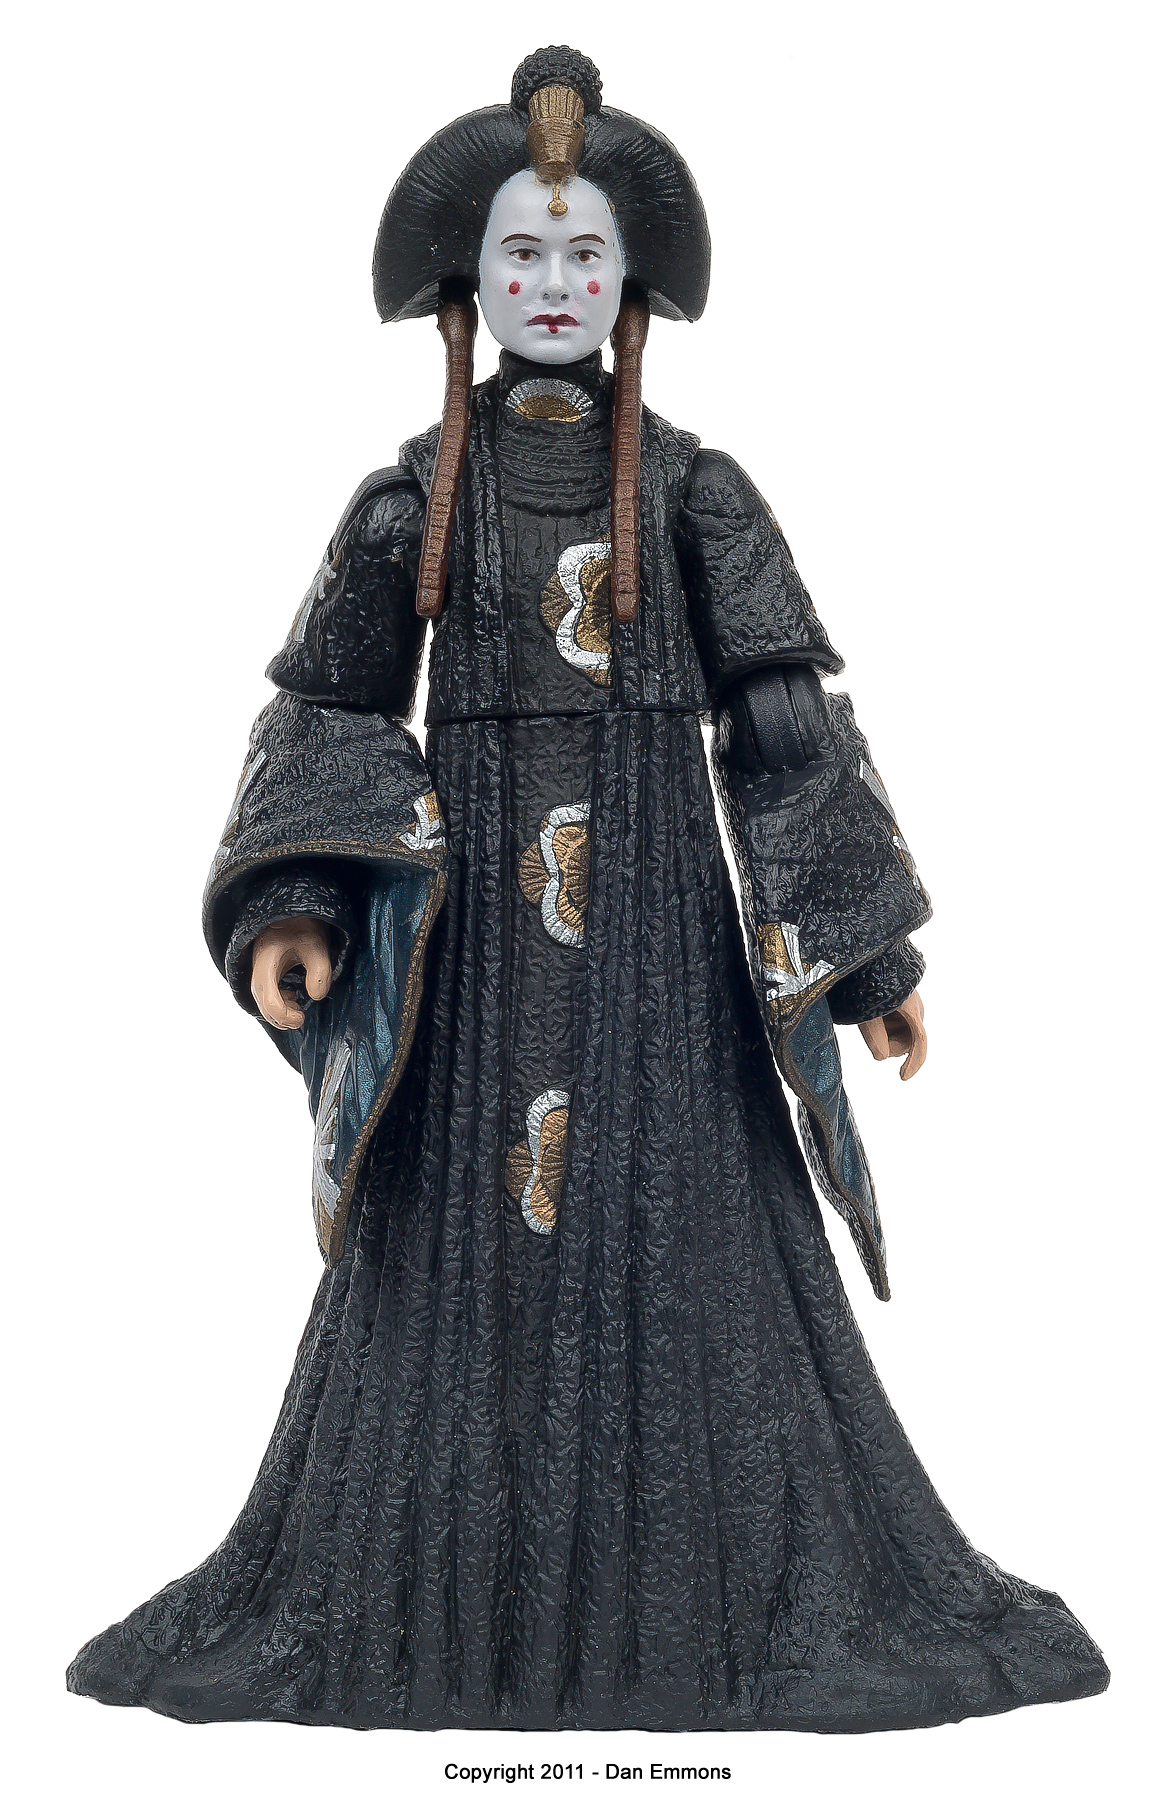 The Vintage Collection - VC84: Queen Amidala